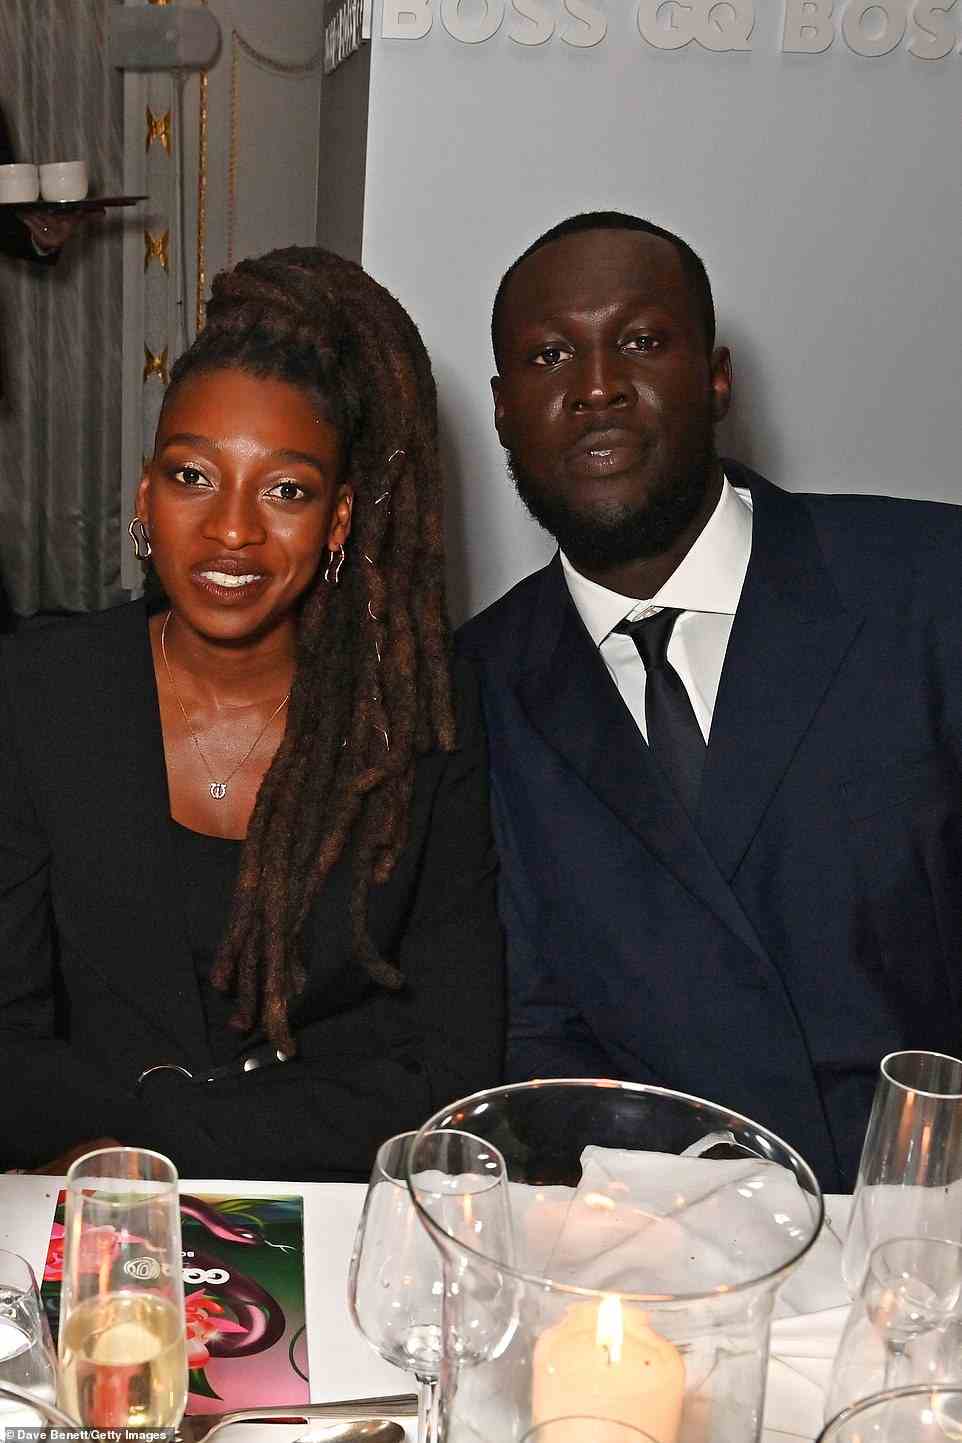 All smiles: Little Simz looked effortlessly glamorous as she posed with dapper Stormzy